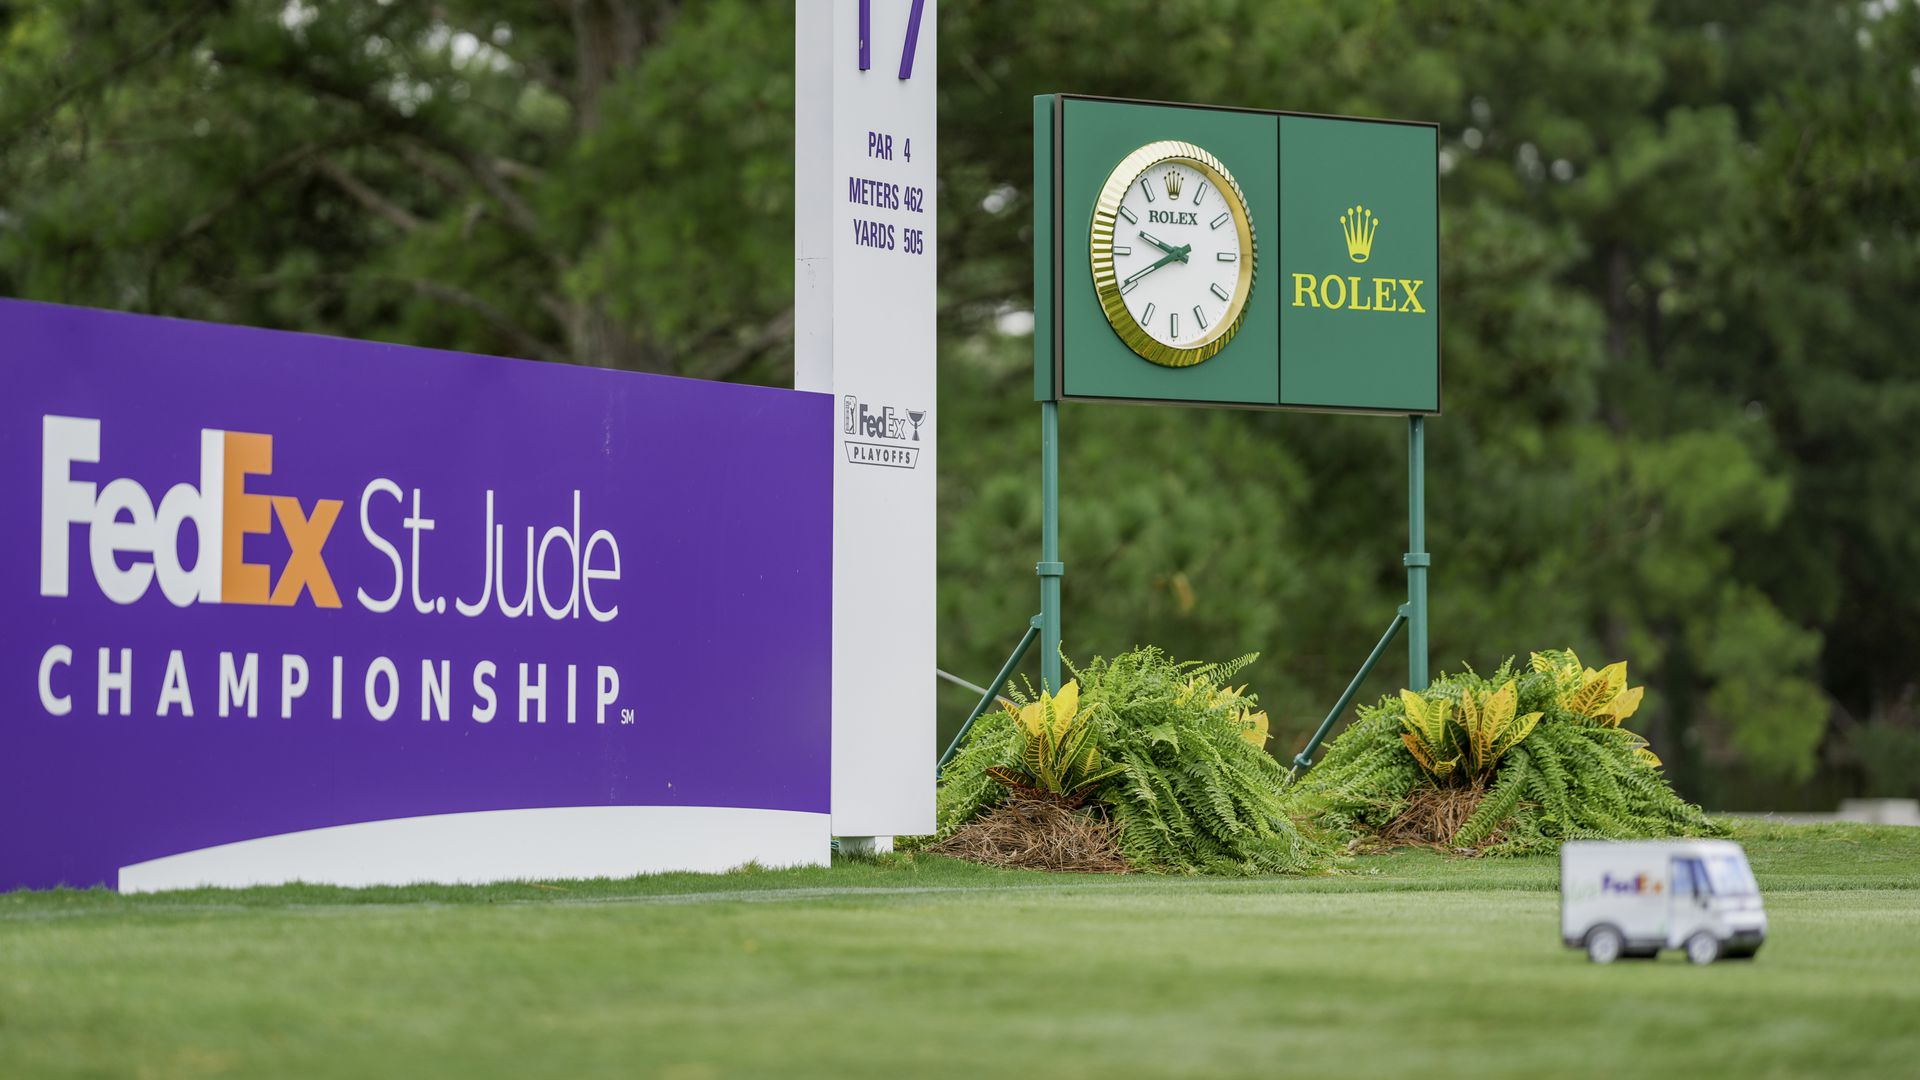 FedEx St. Jude Championship How to watch, TV schedule, streaming, tee